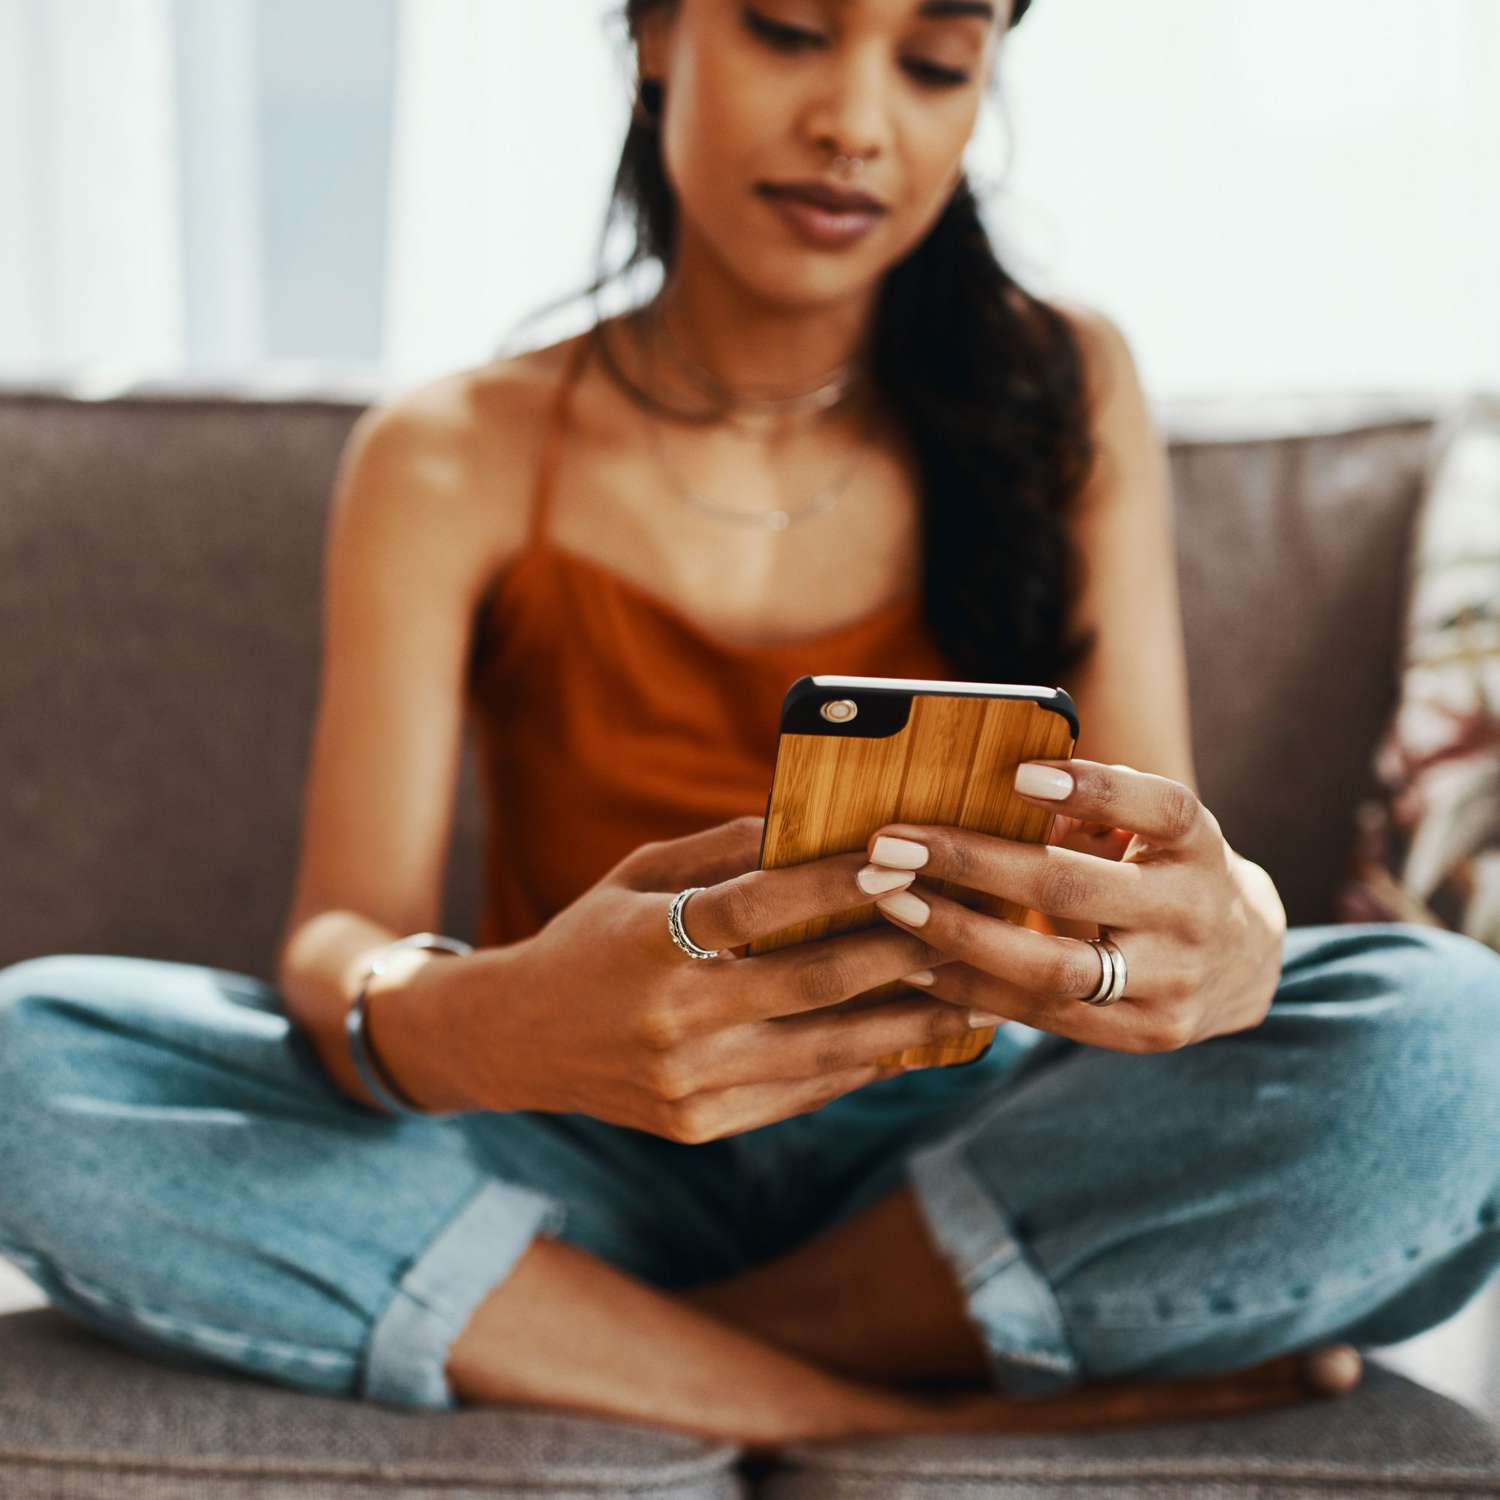 Woman_Sitting_On_Couch_Looking_At_Phone